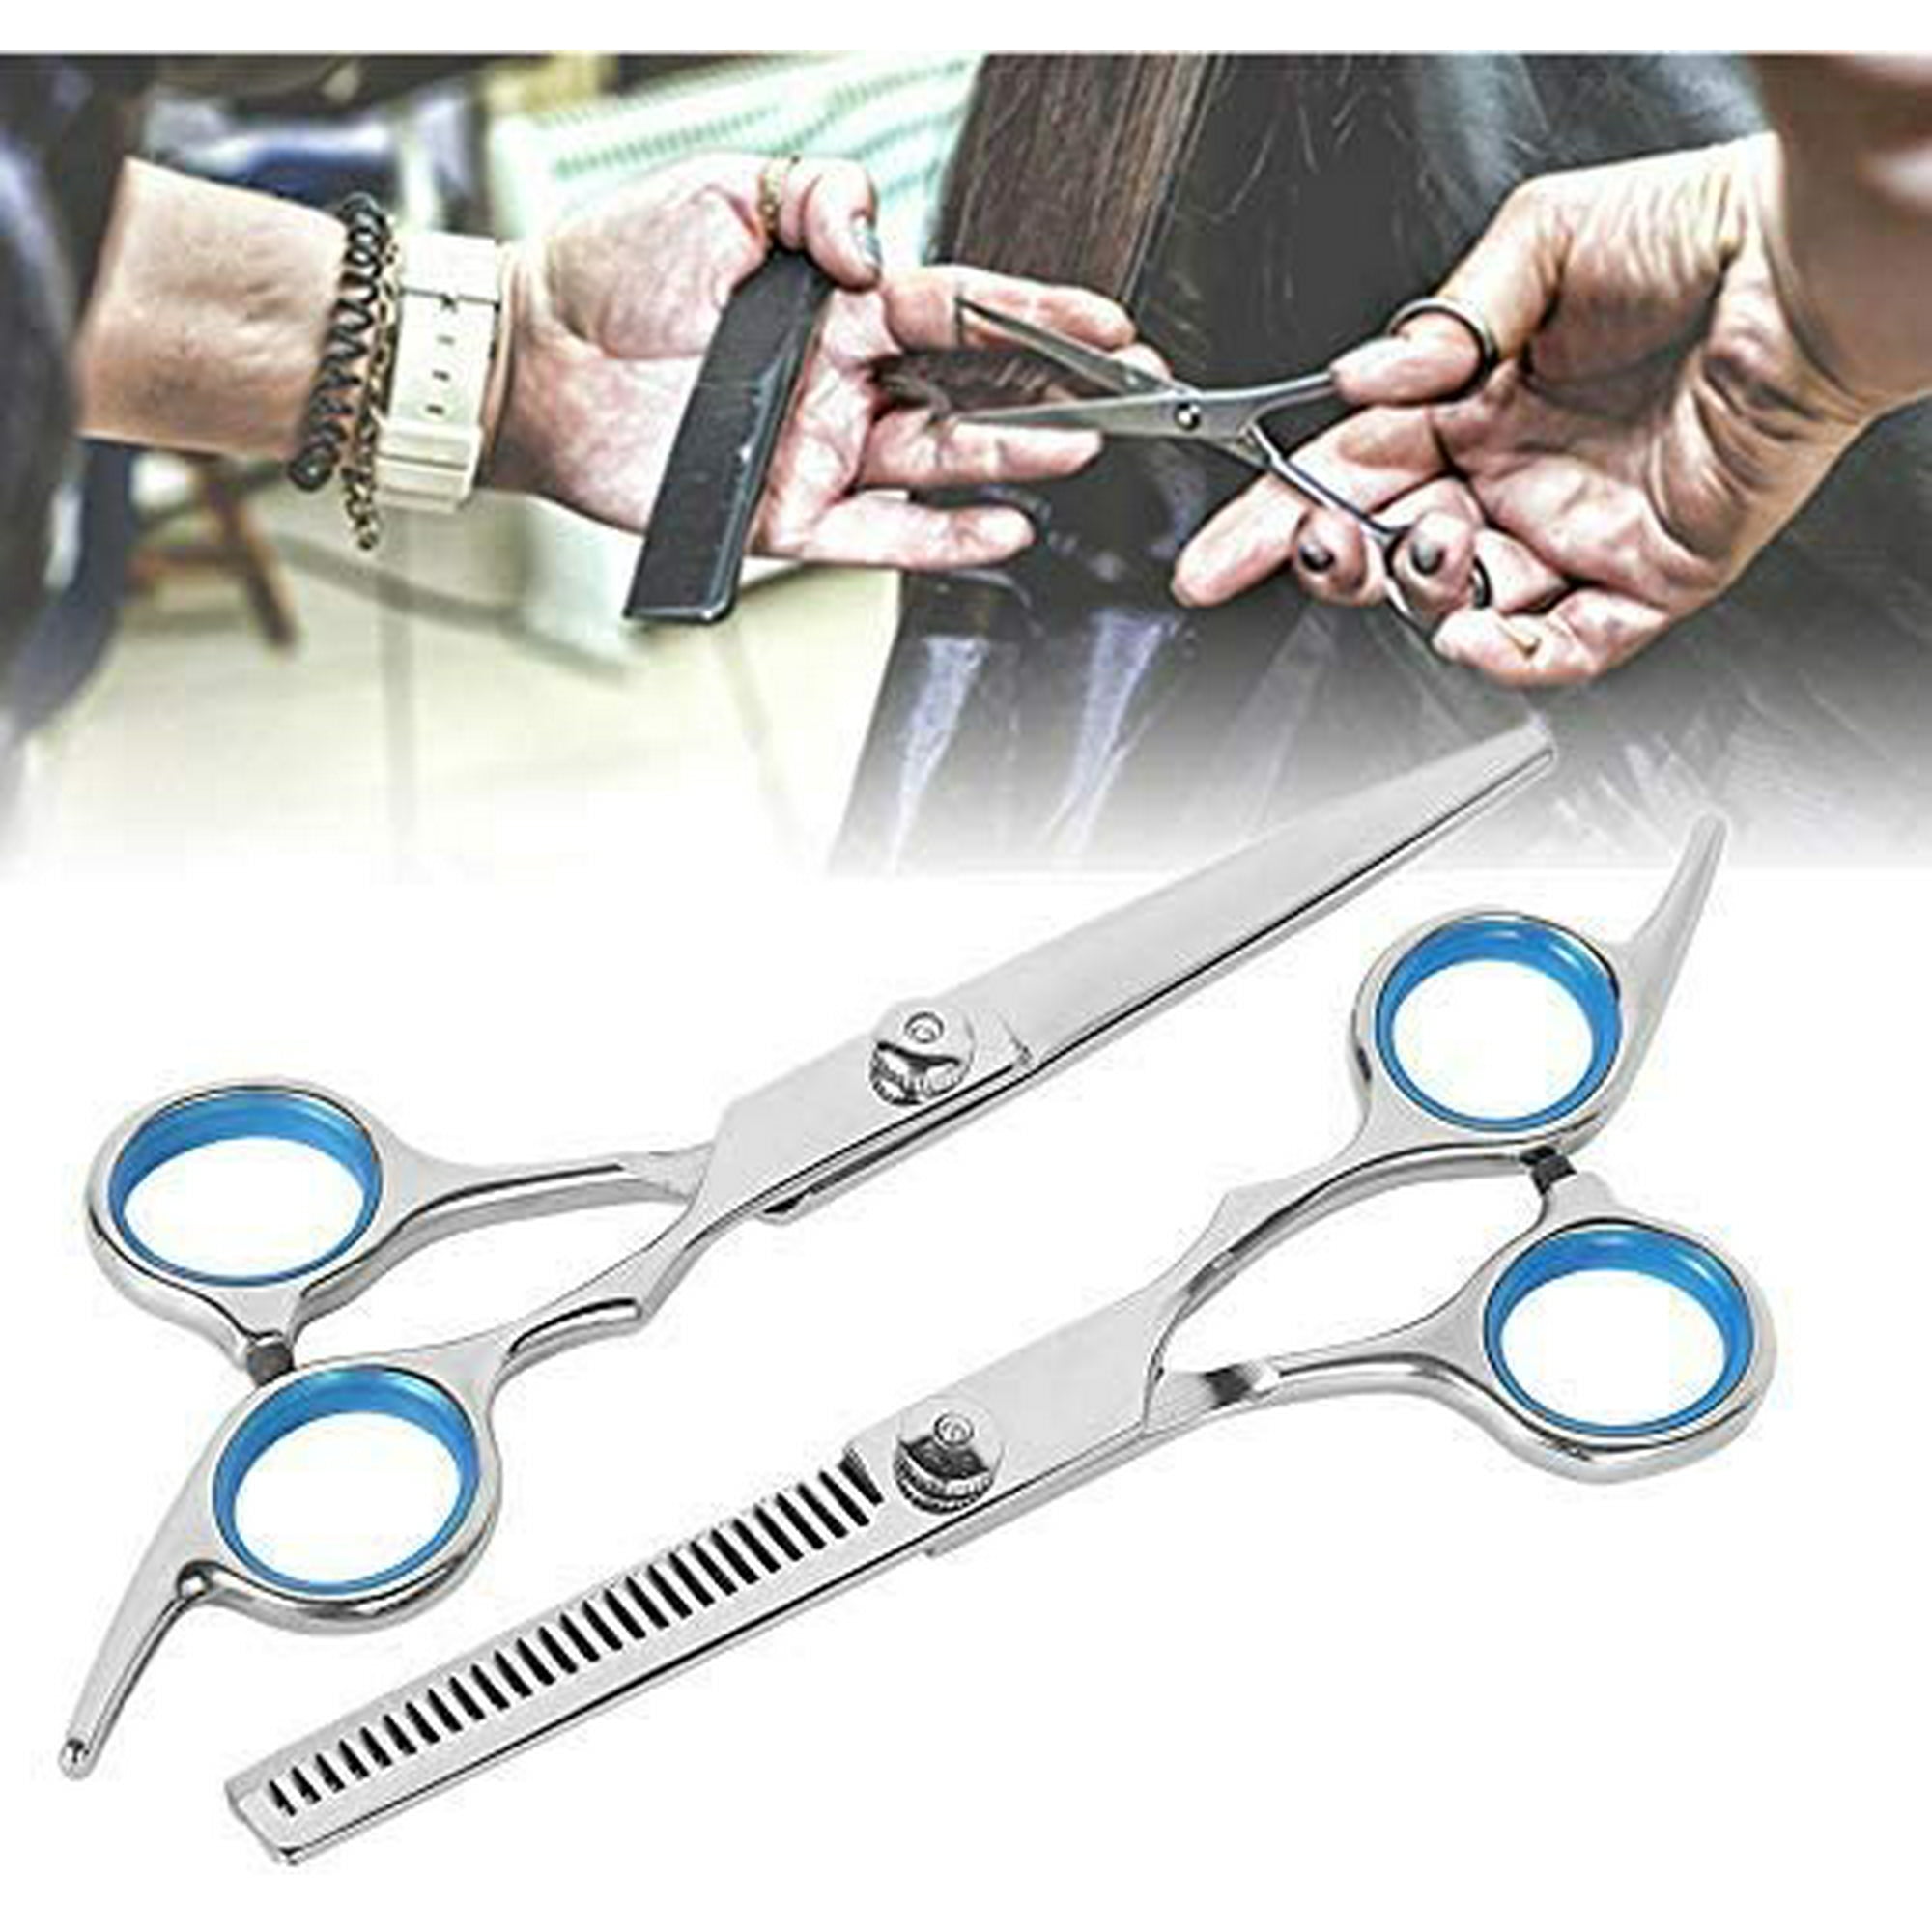 Professional Hair Cutting Kits  Inch Hairdressing Thinning Barber  Scissors Set Hair Cutting Shears for Men and Women | Walmart Canada